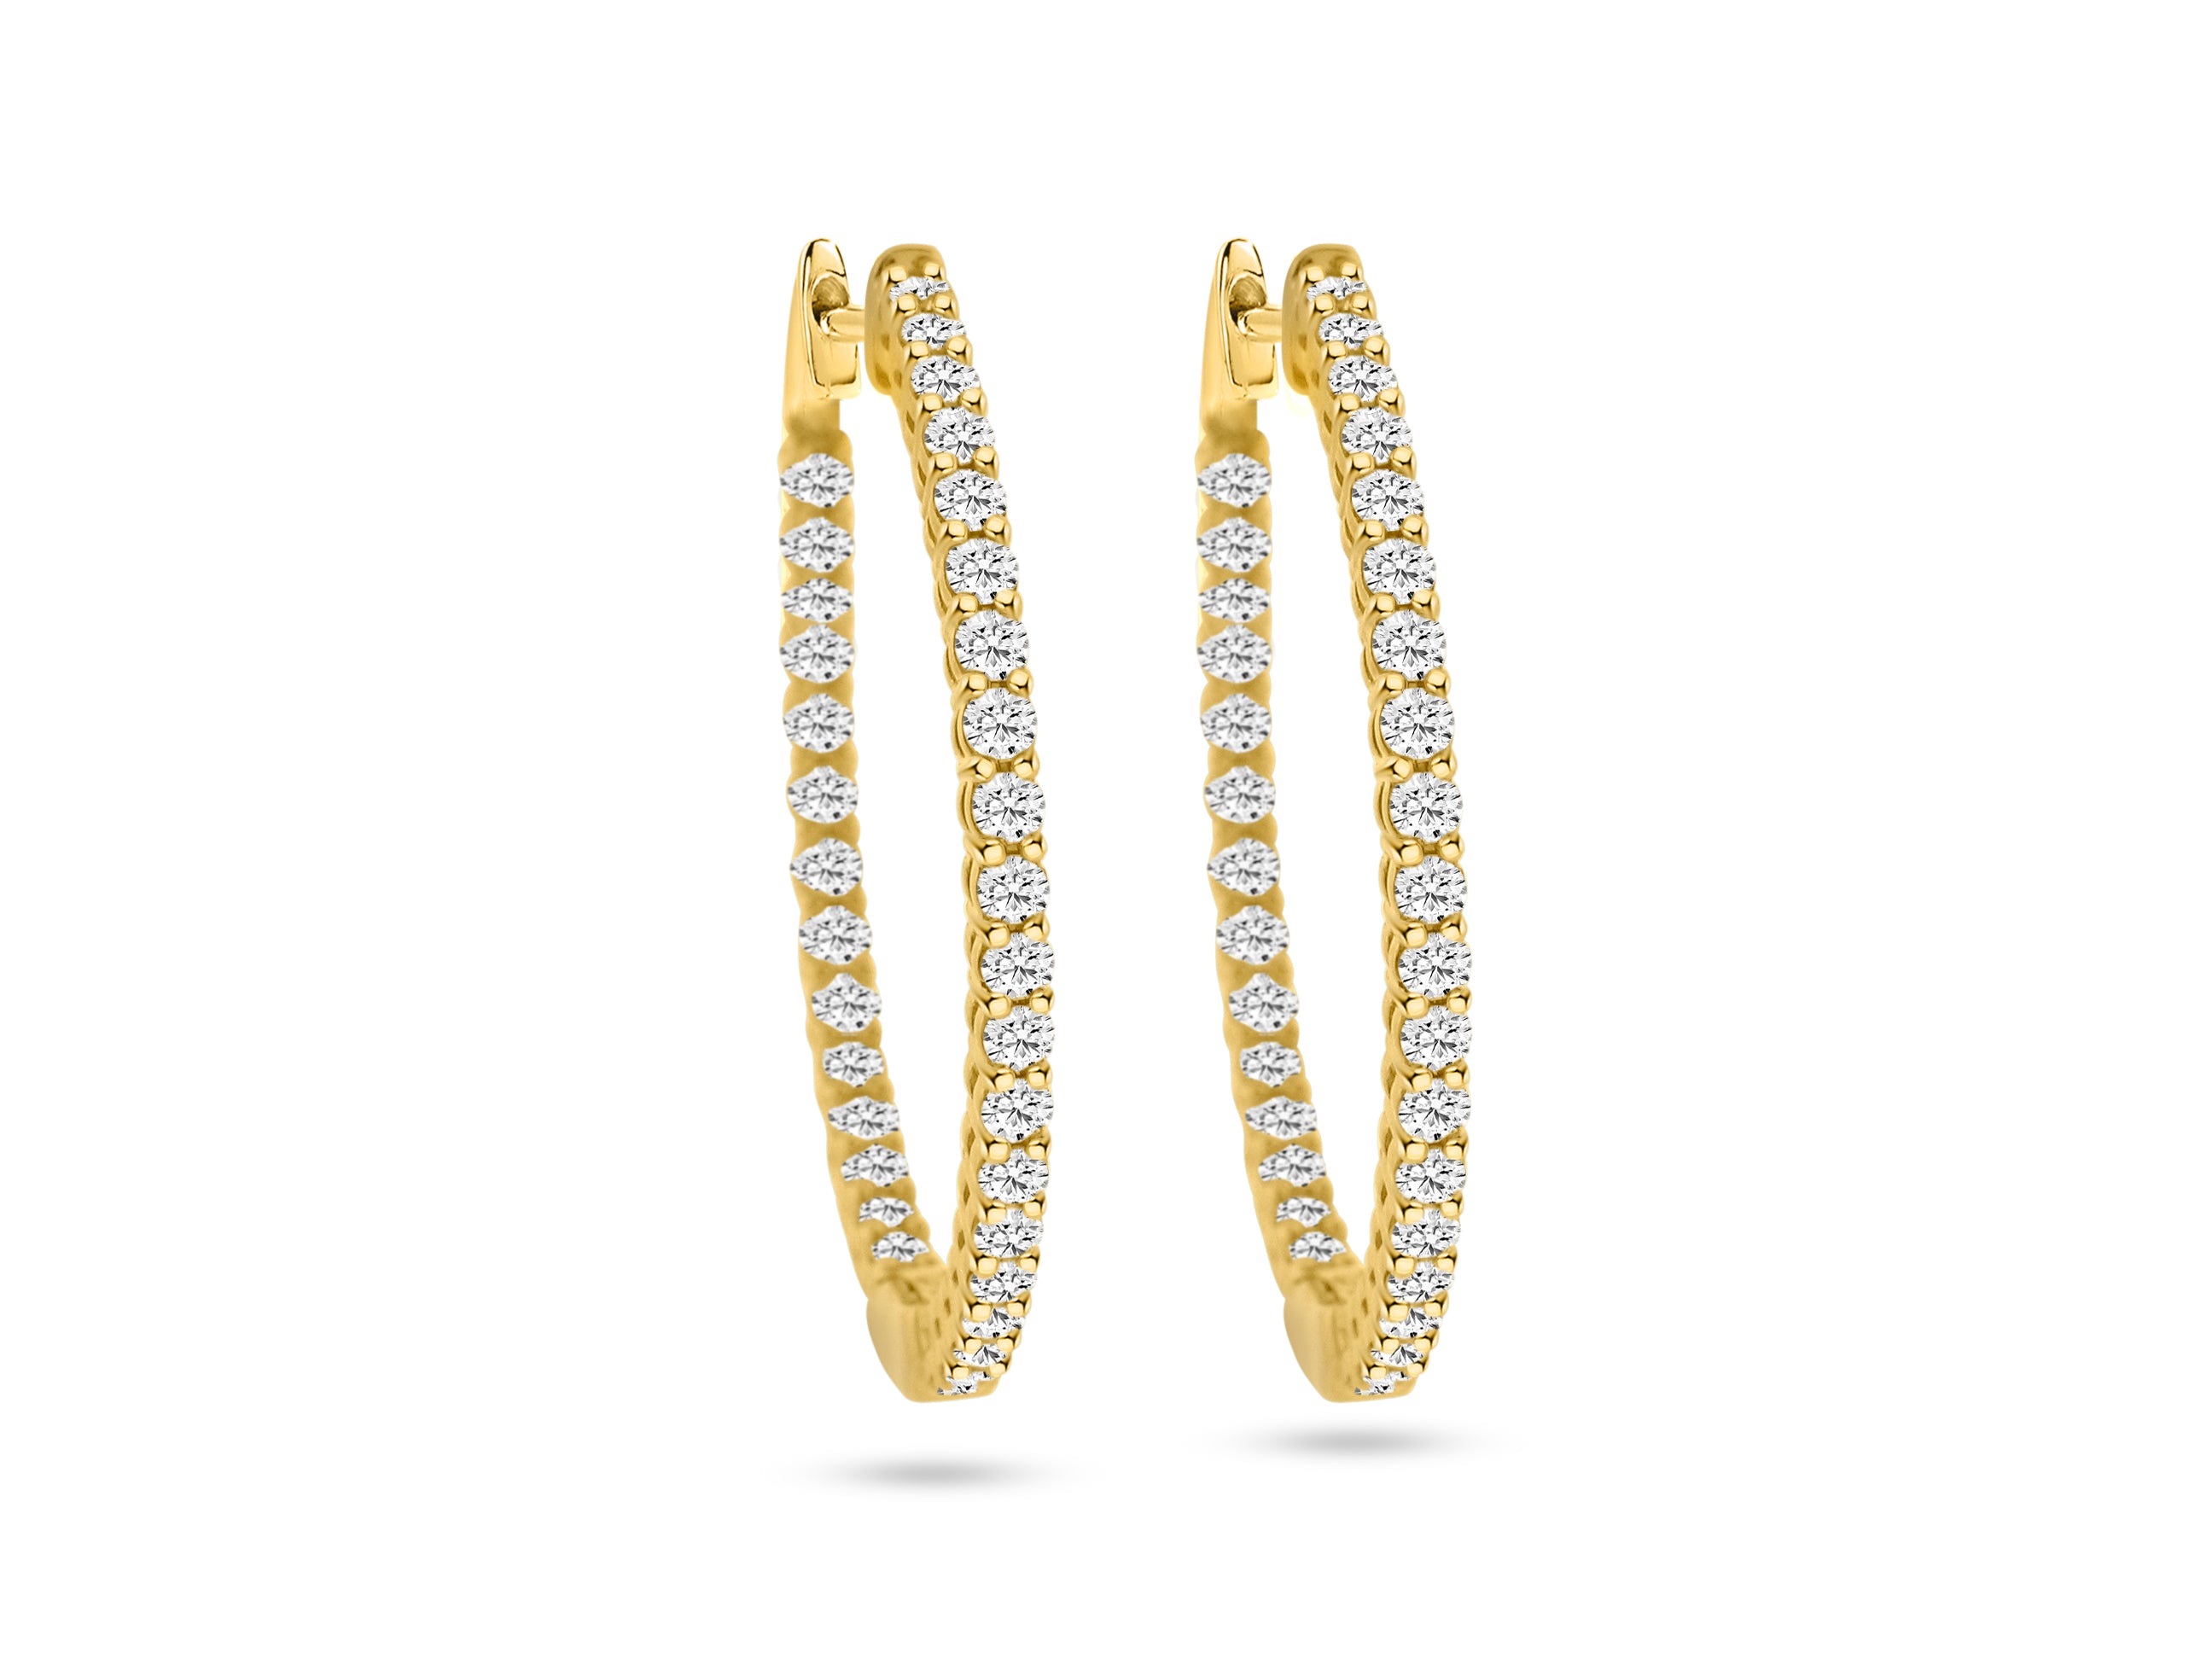 MULLOYS PRIVE'14K YELLOW GOLD 2.00CT SI1-2 CLARITY G-H COLOR DIAMOND HOOPS